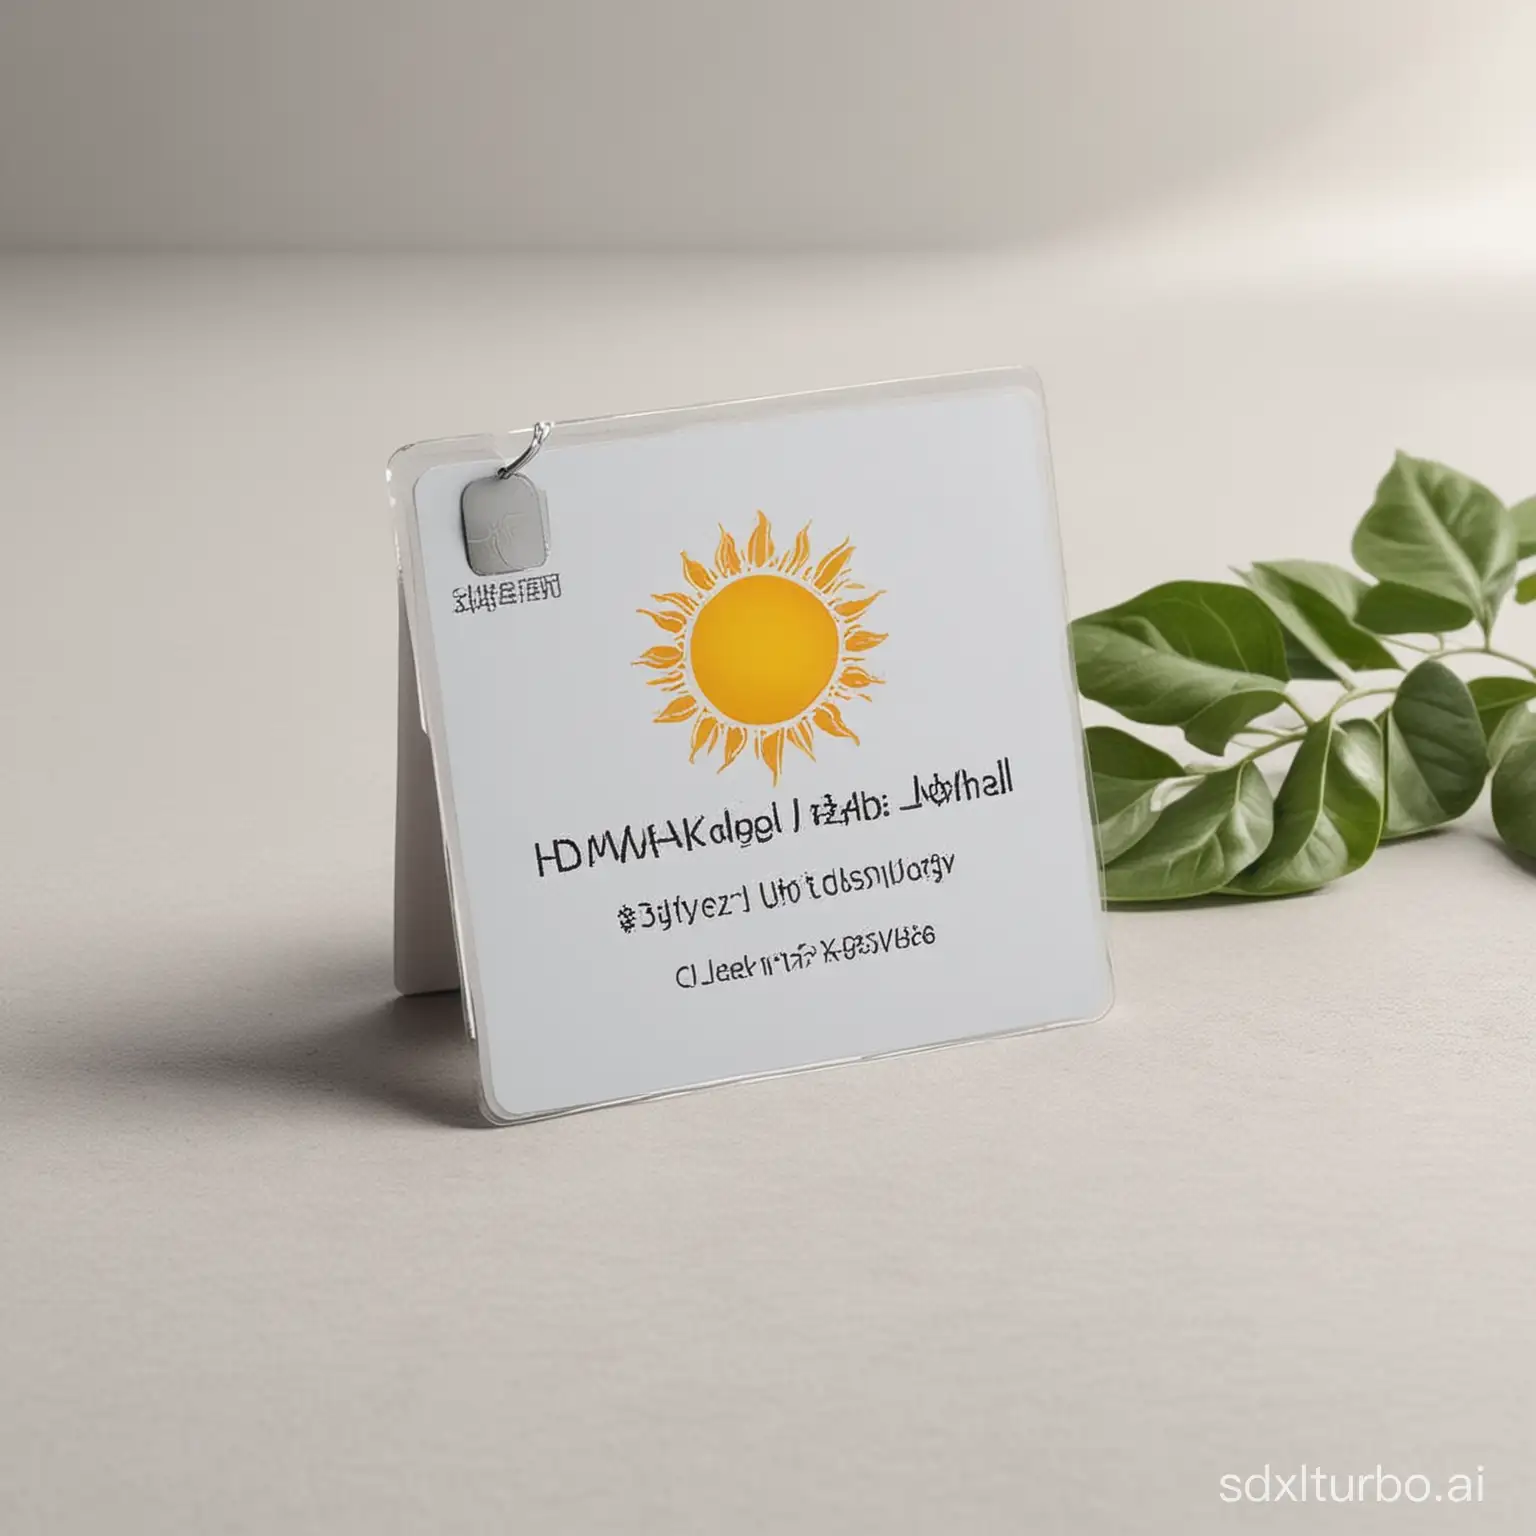 Small-Work-ID-Card-Set-on-White-Platform-with-Sun-and-Leaves-Background